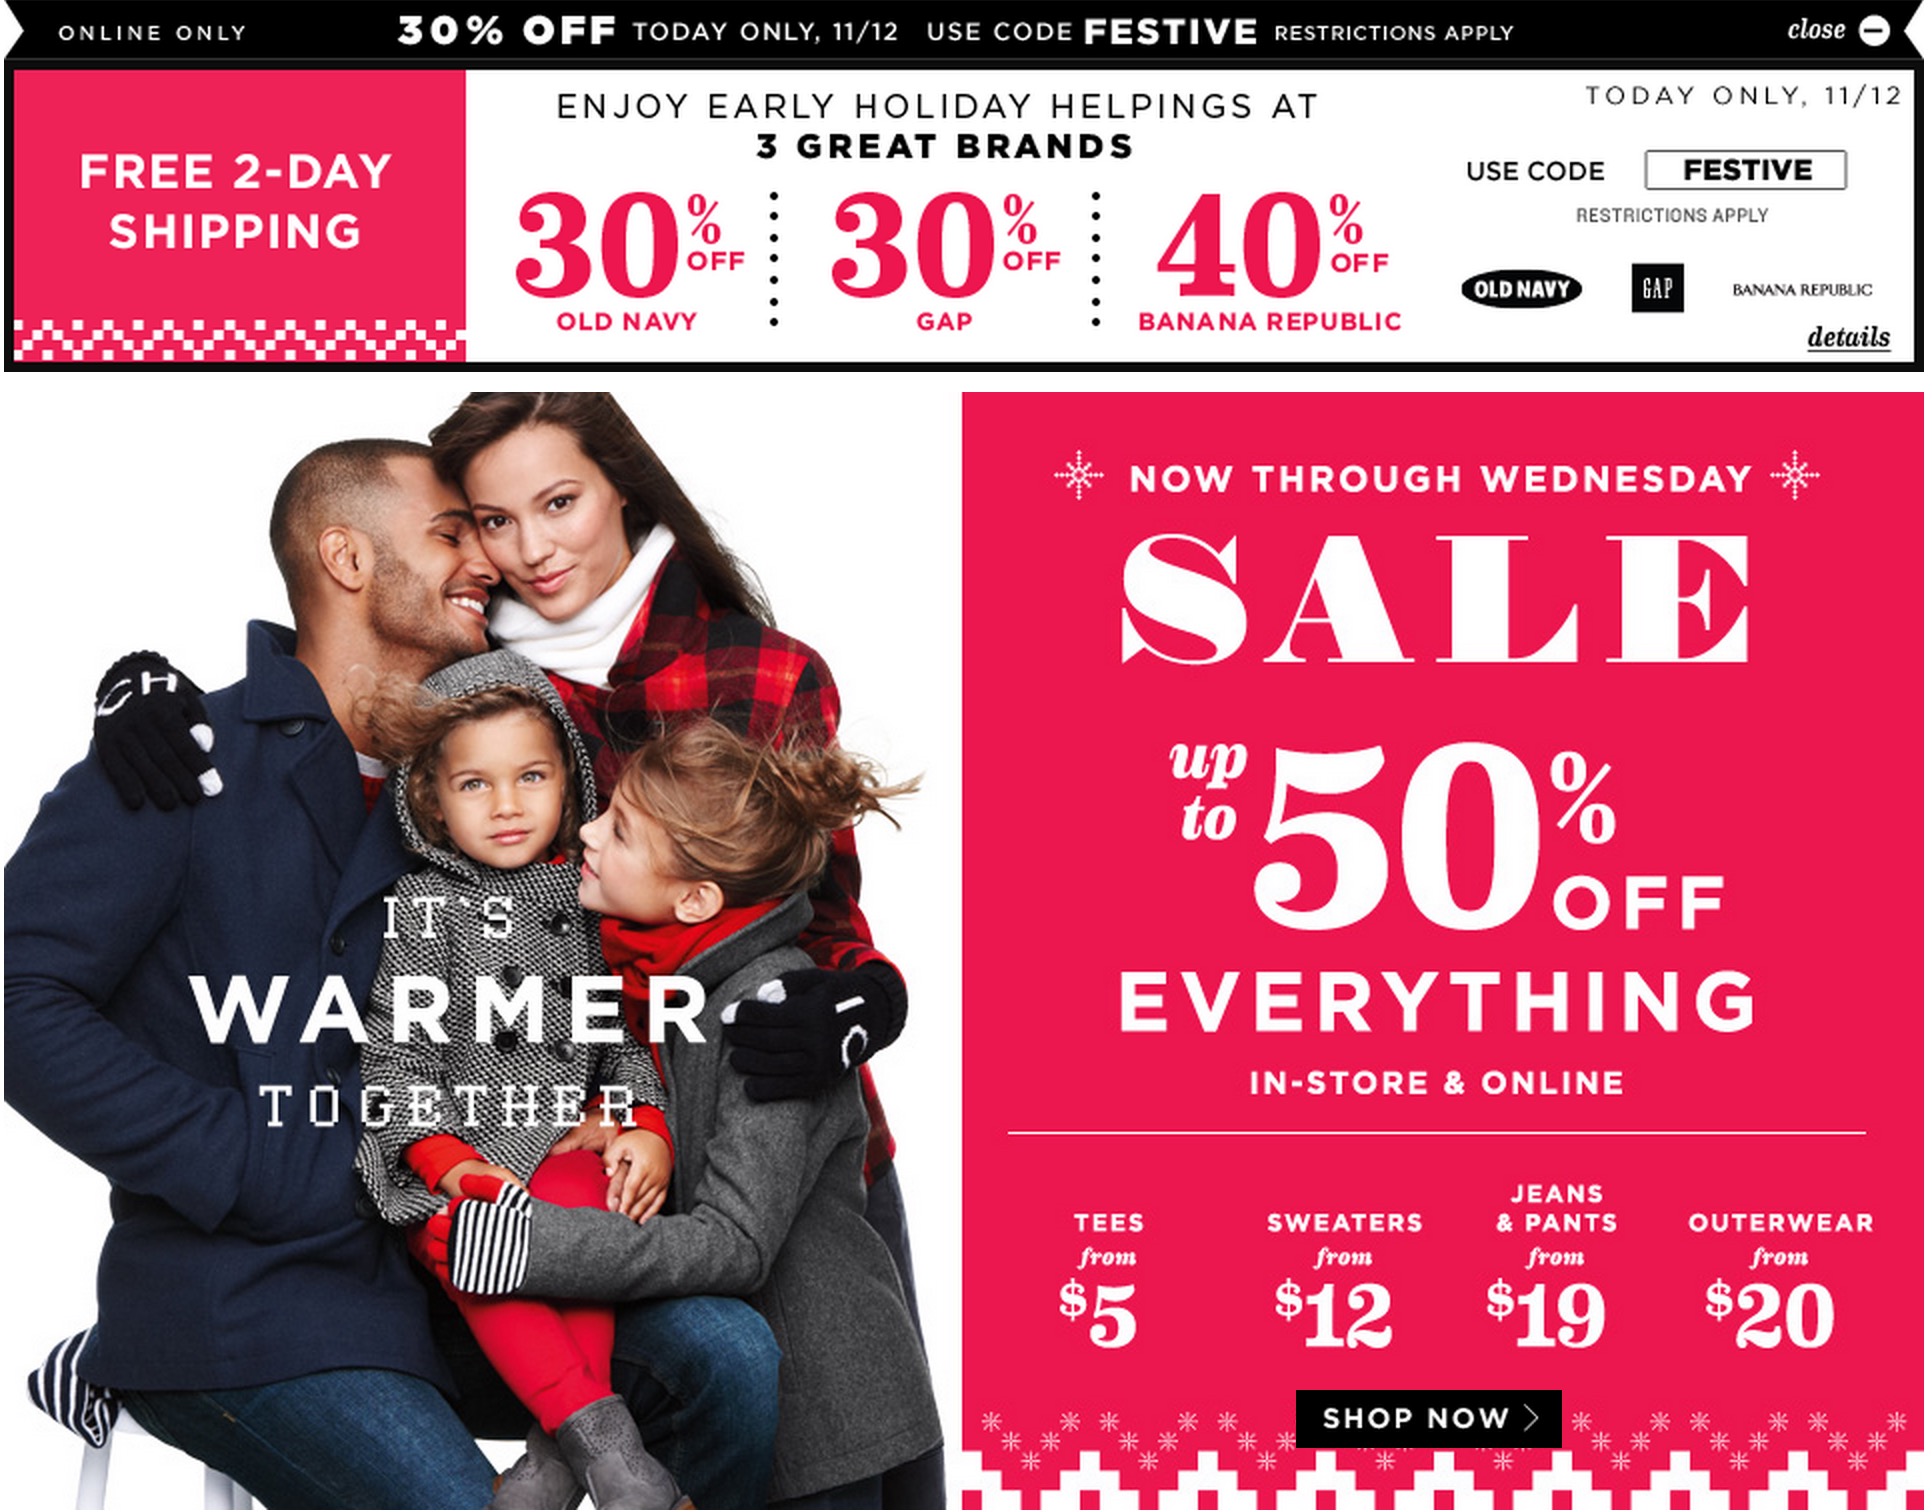 Old Navy/Gap/Banana Republic 1 day FESTIVE sale online: Up to 40 % off